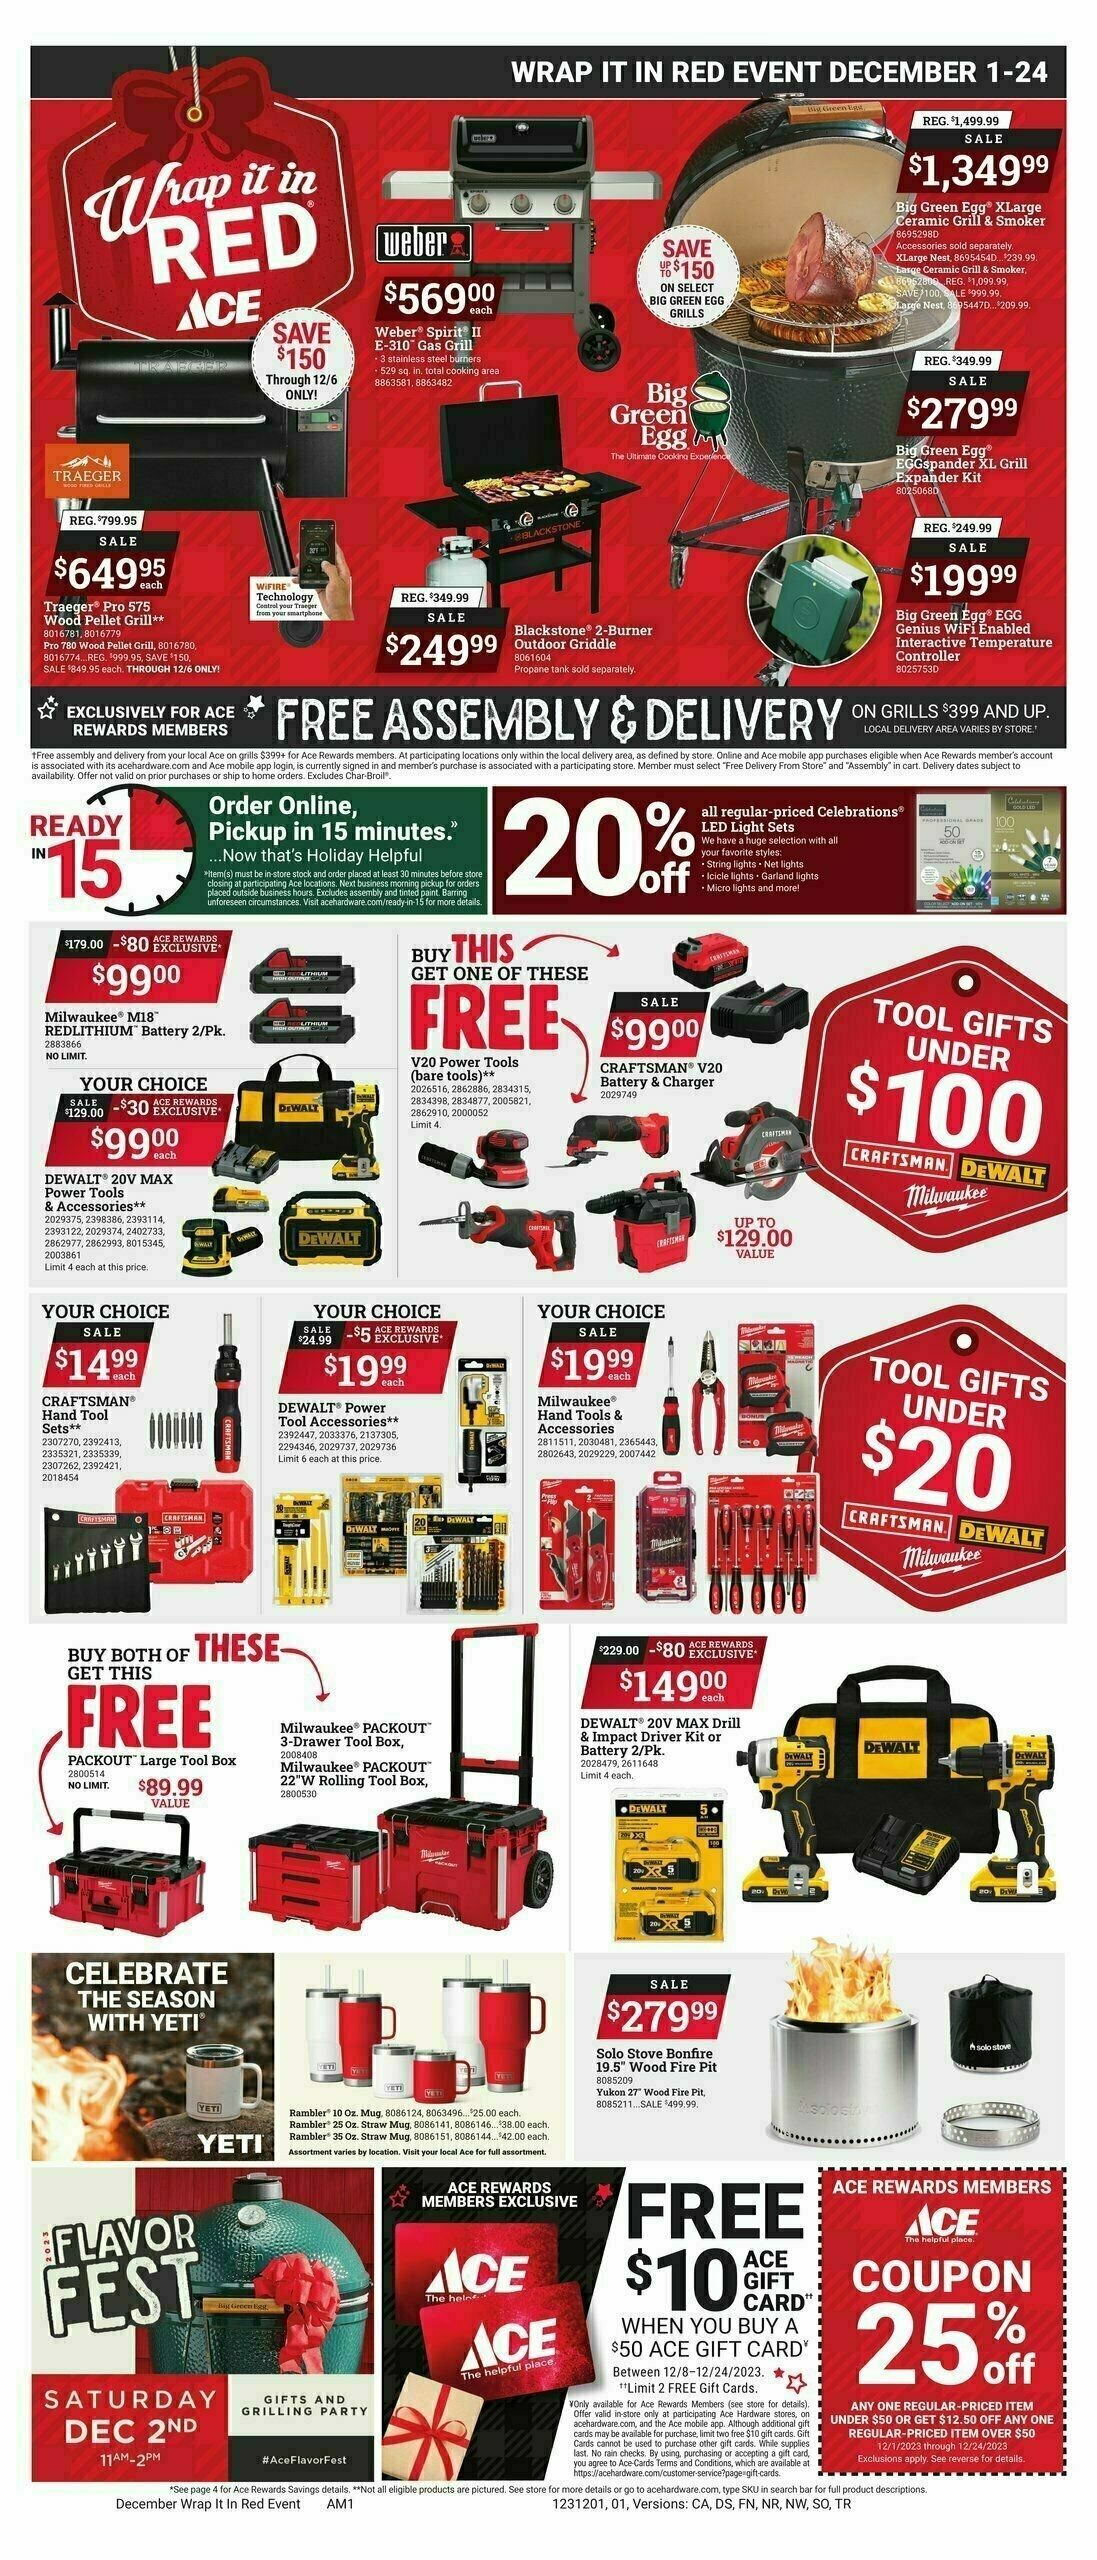 Ace Hardware Wrap it in Red Event Weekly Ad from December 1